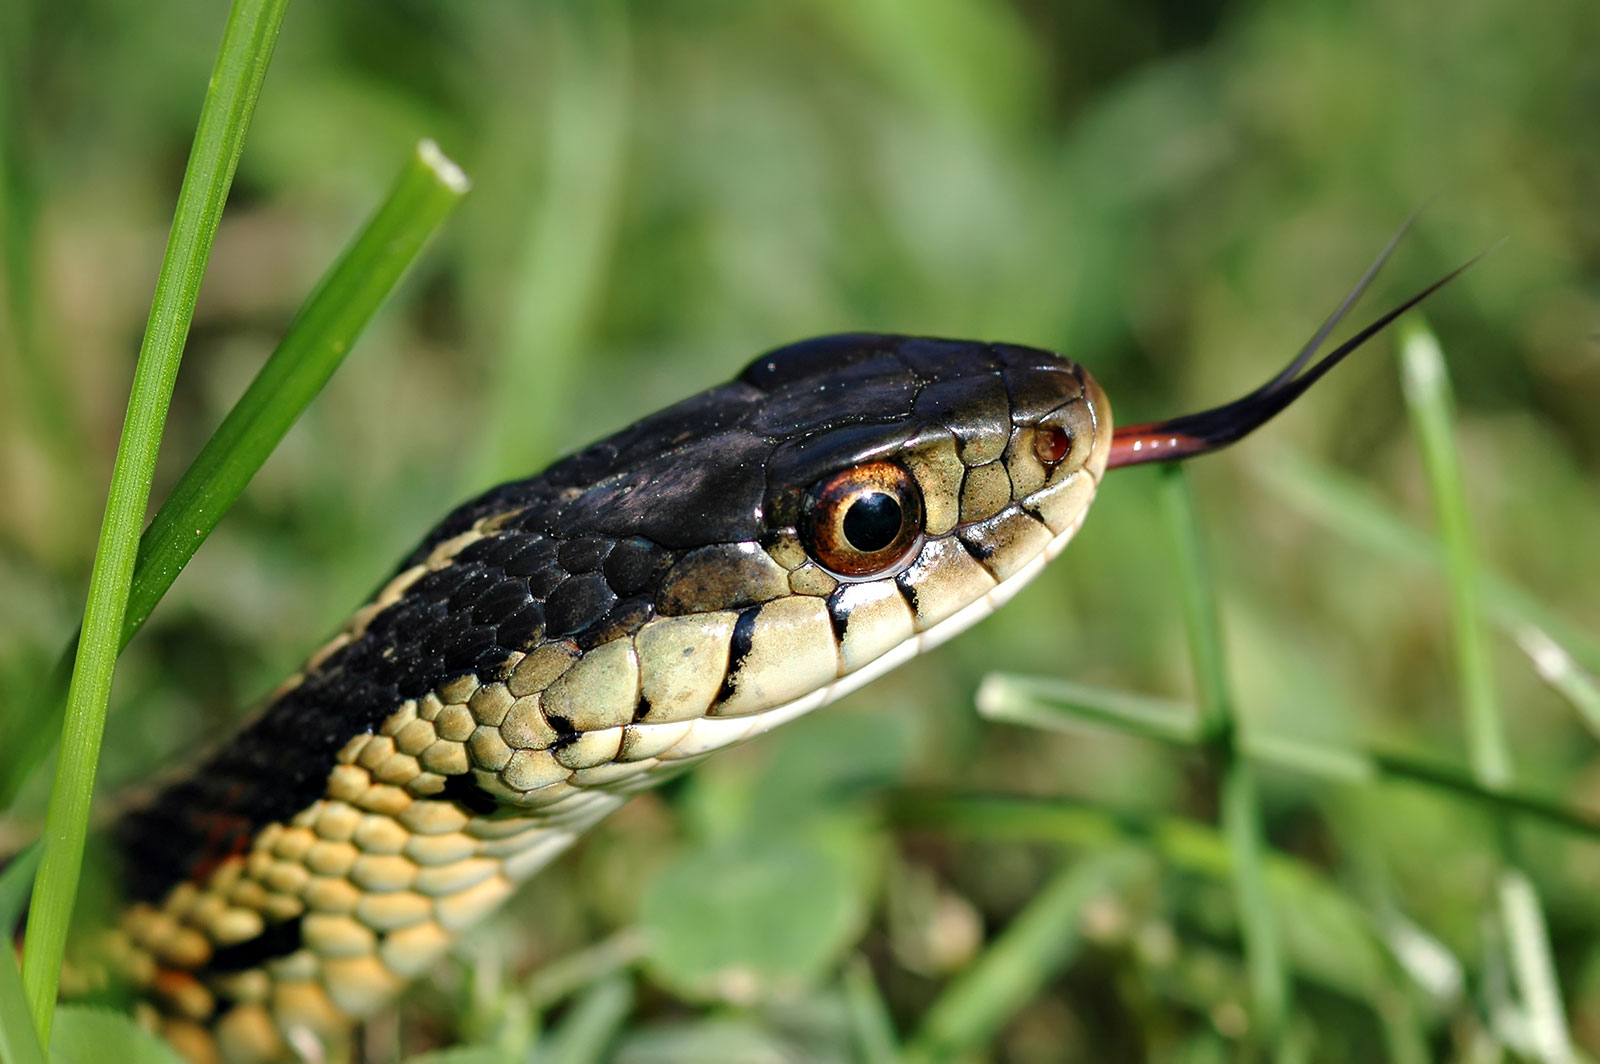 How To Keep Snakes Away From Your Property: 5 Foolproof Methods